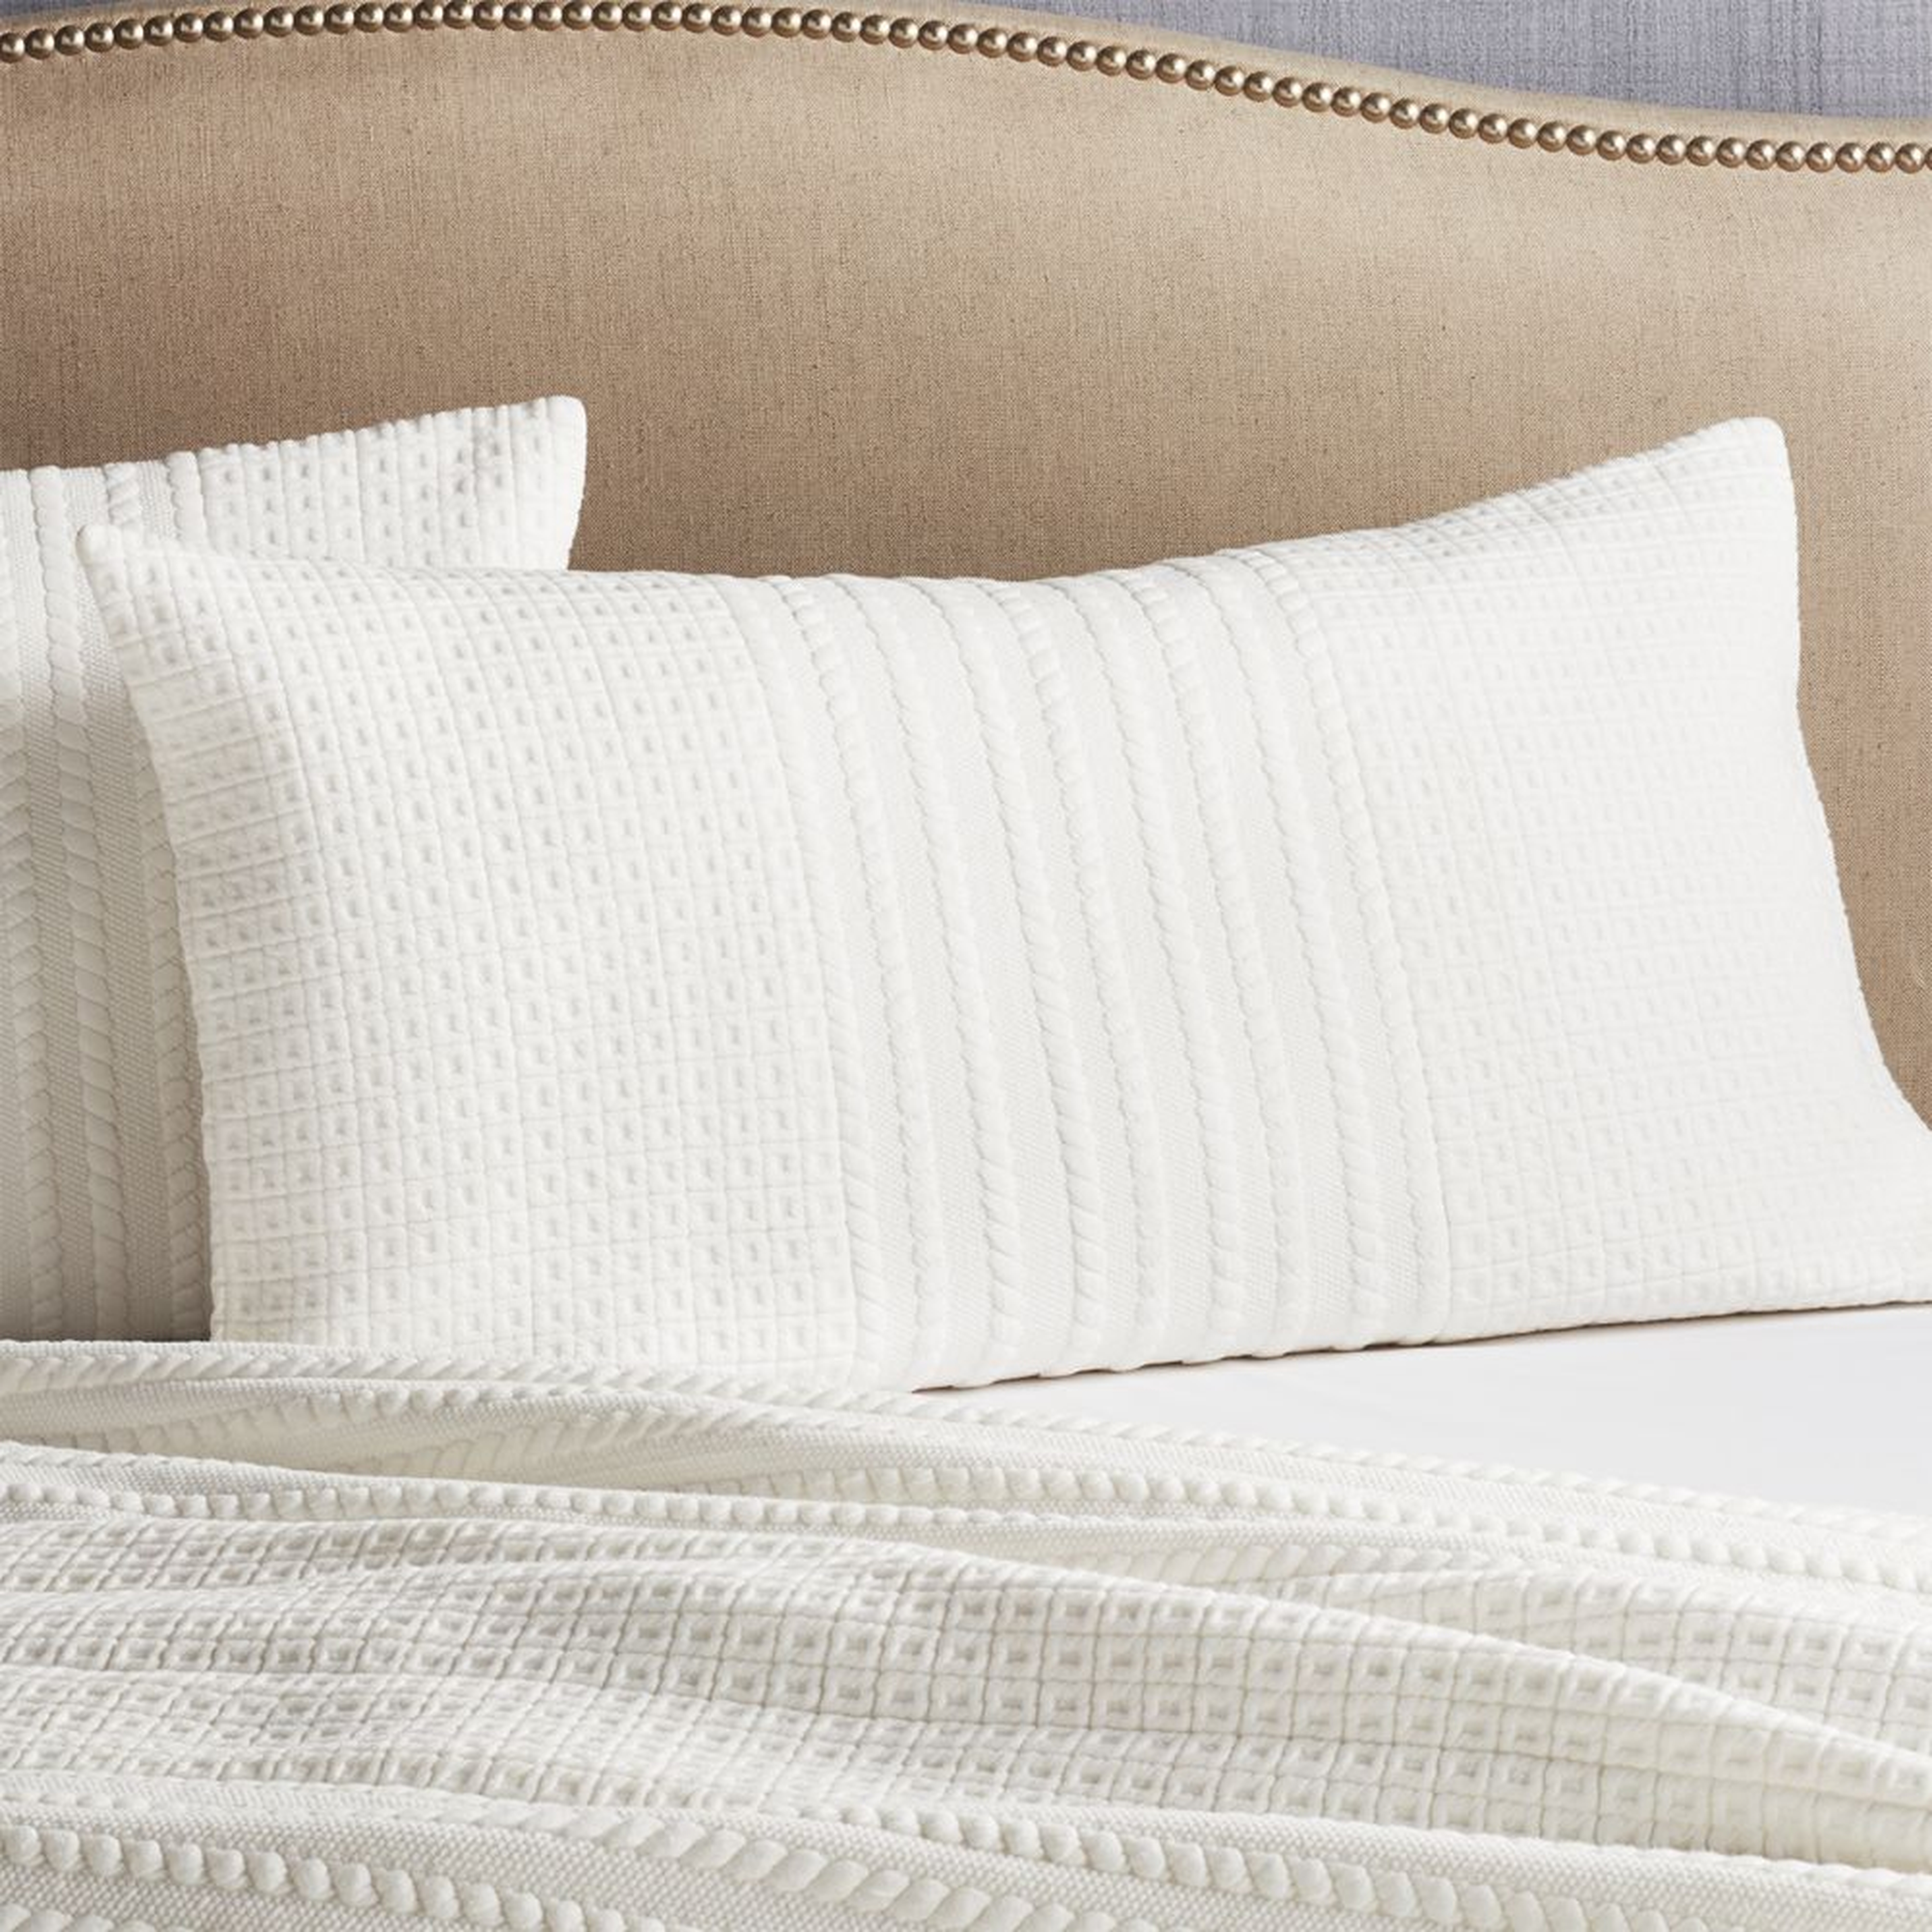 Doret White King Pillow Sham - Crate and Barrel